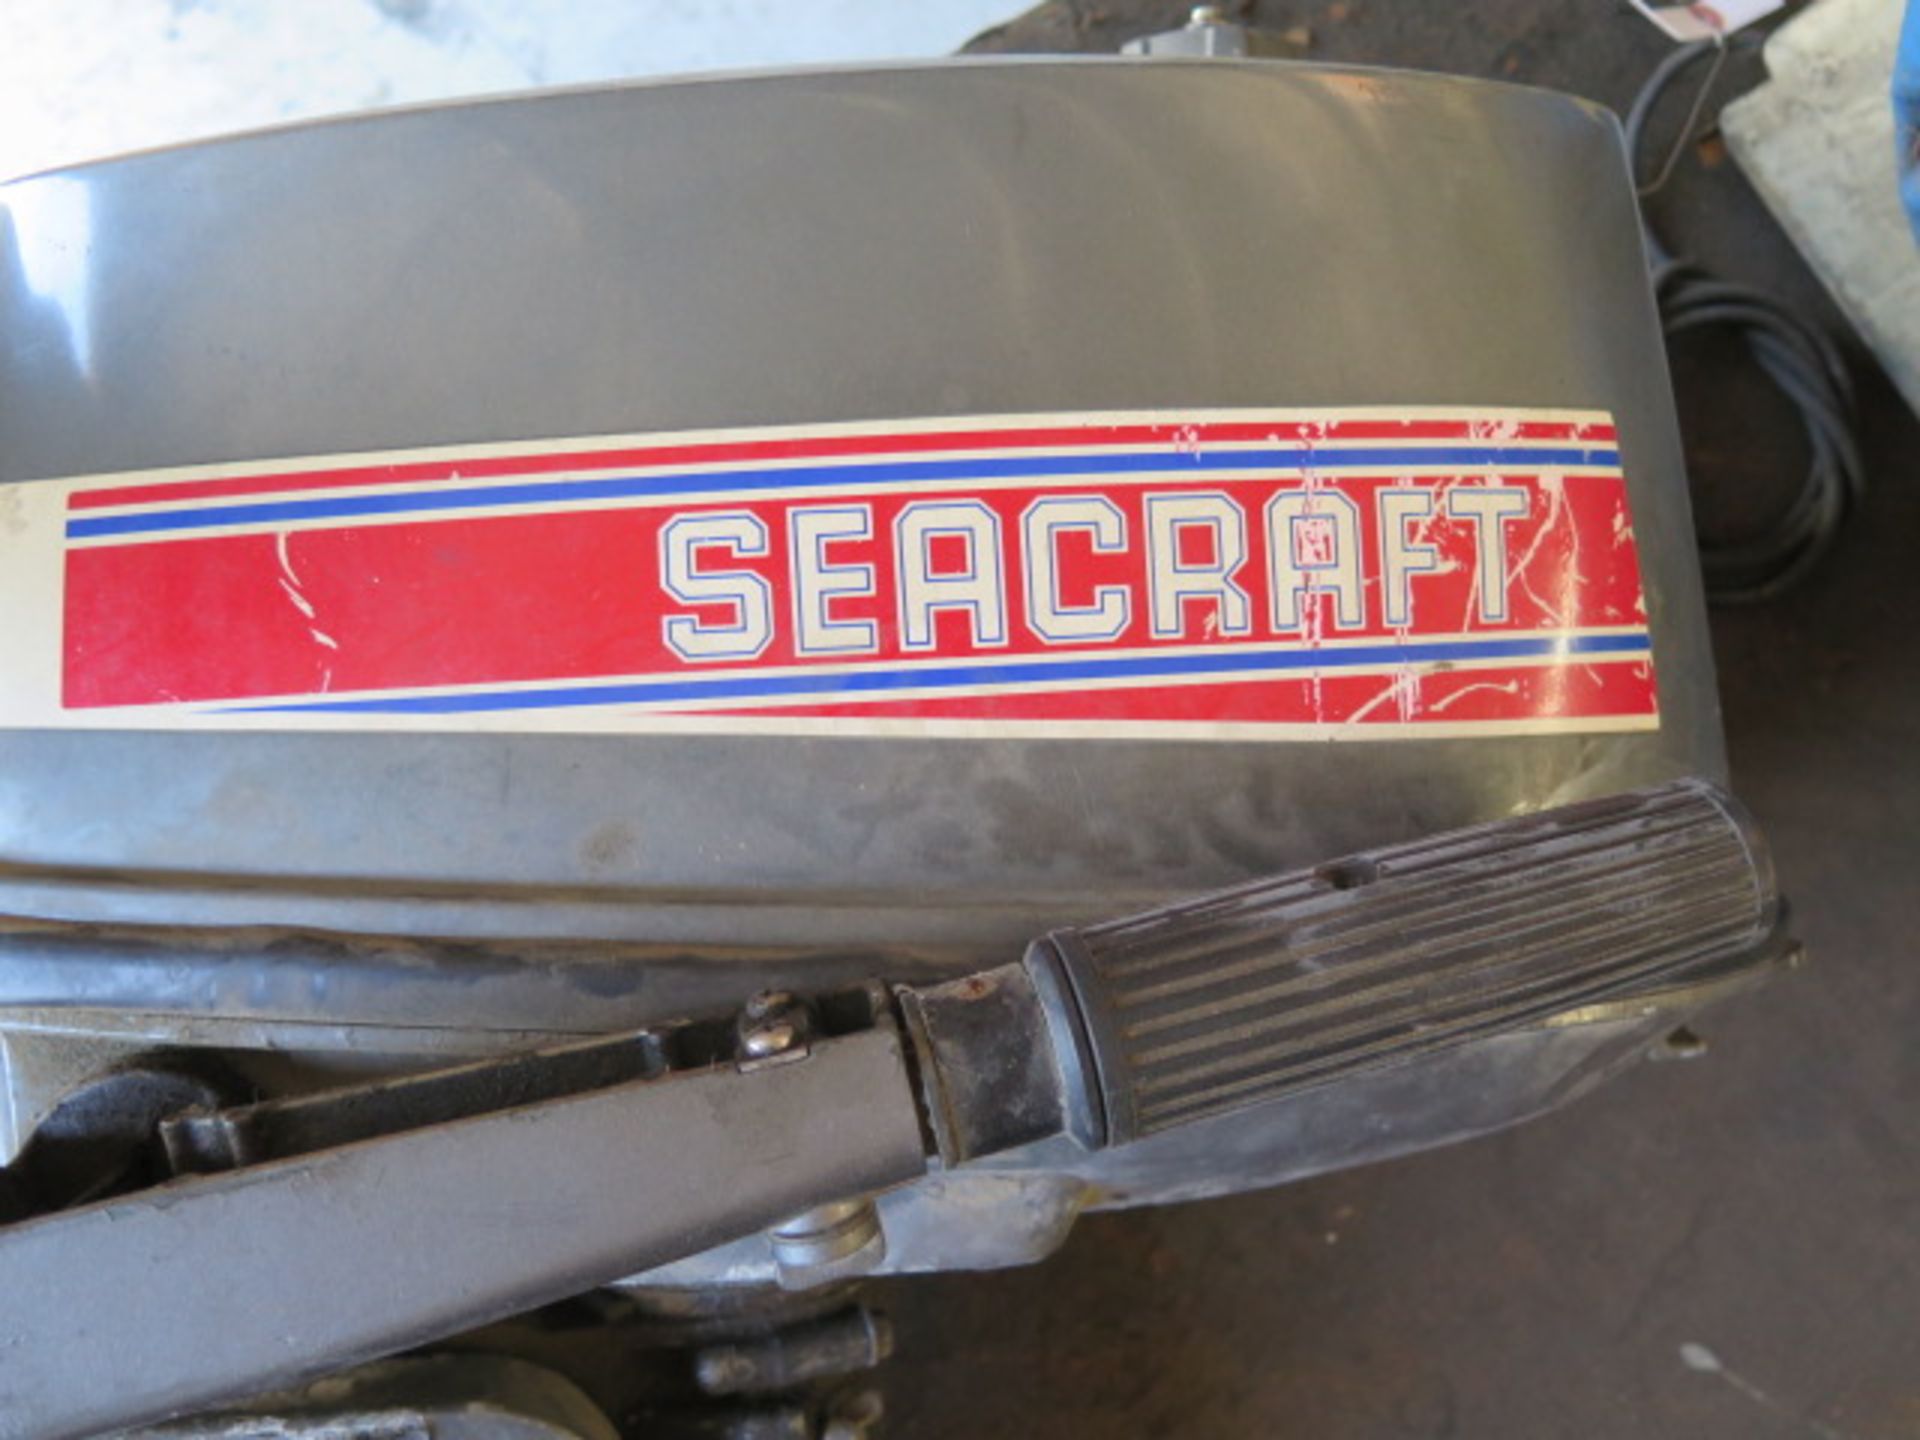 Seacraft-4 4Hp Outboard Motor - Image 2 of 6